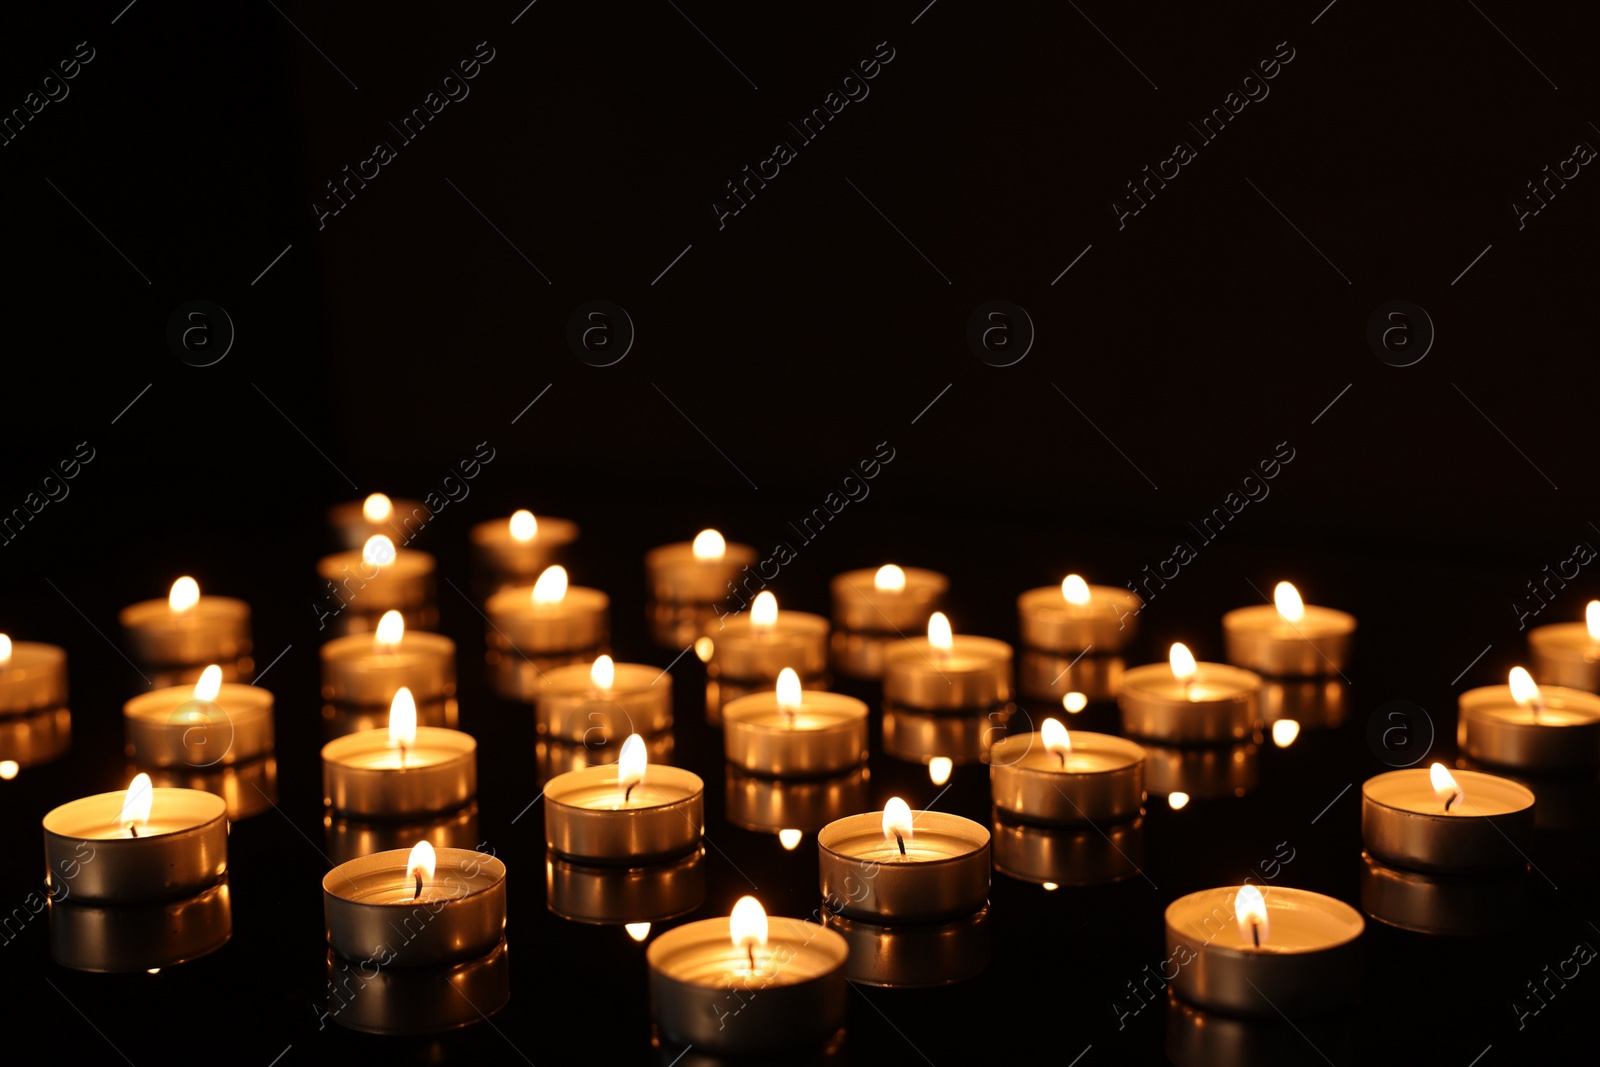 Photo of Burning candles on mirror surface in darkness